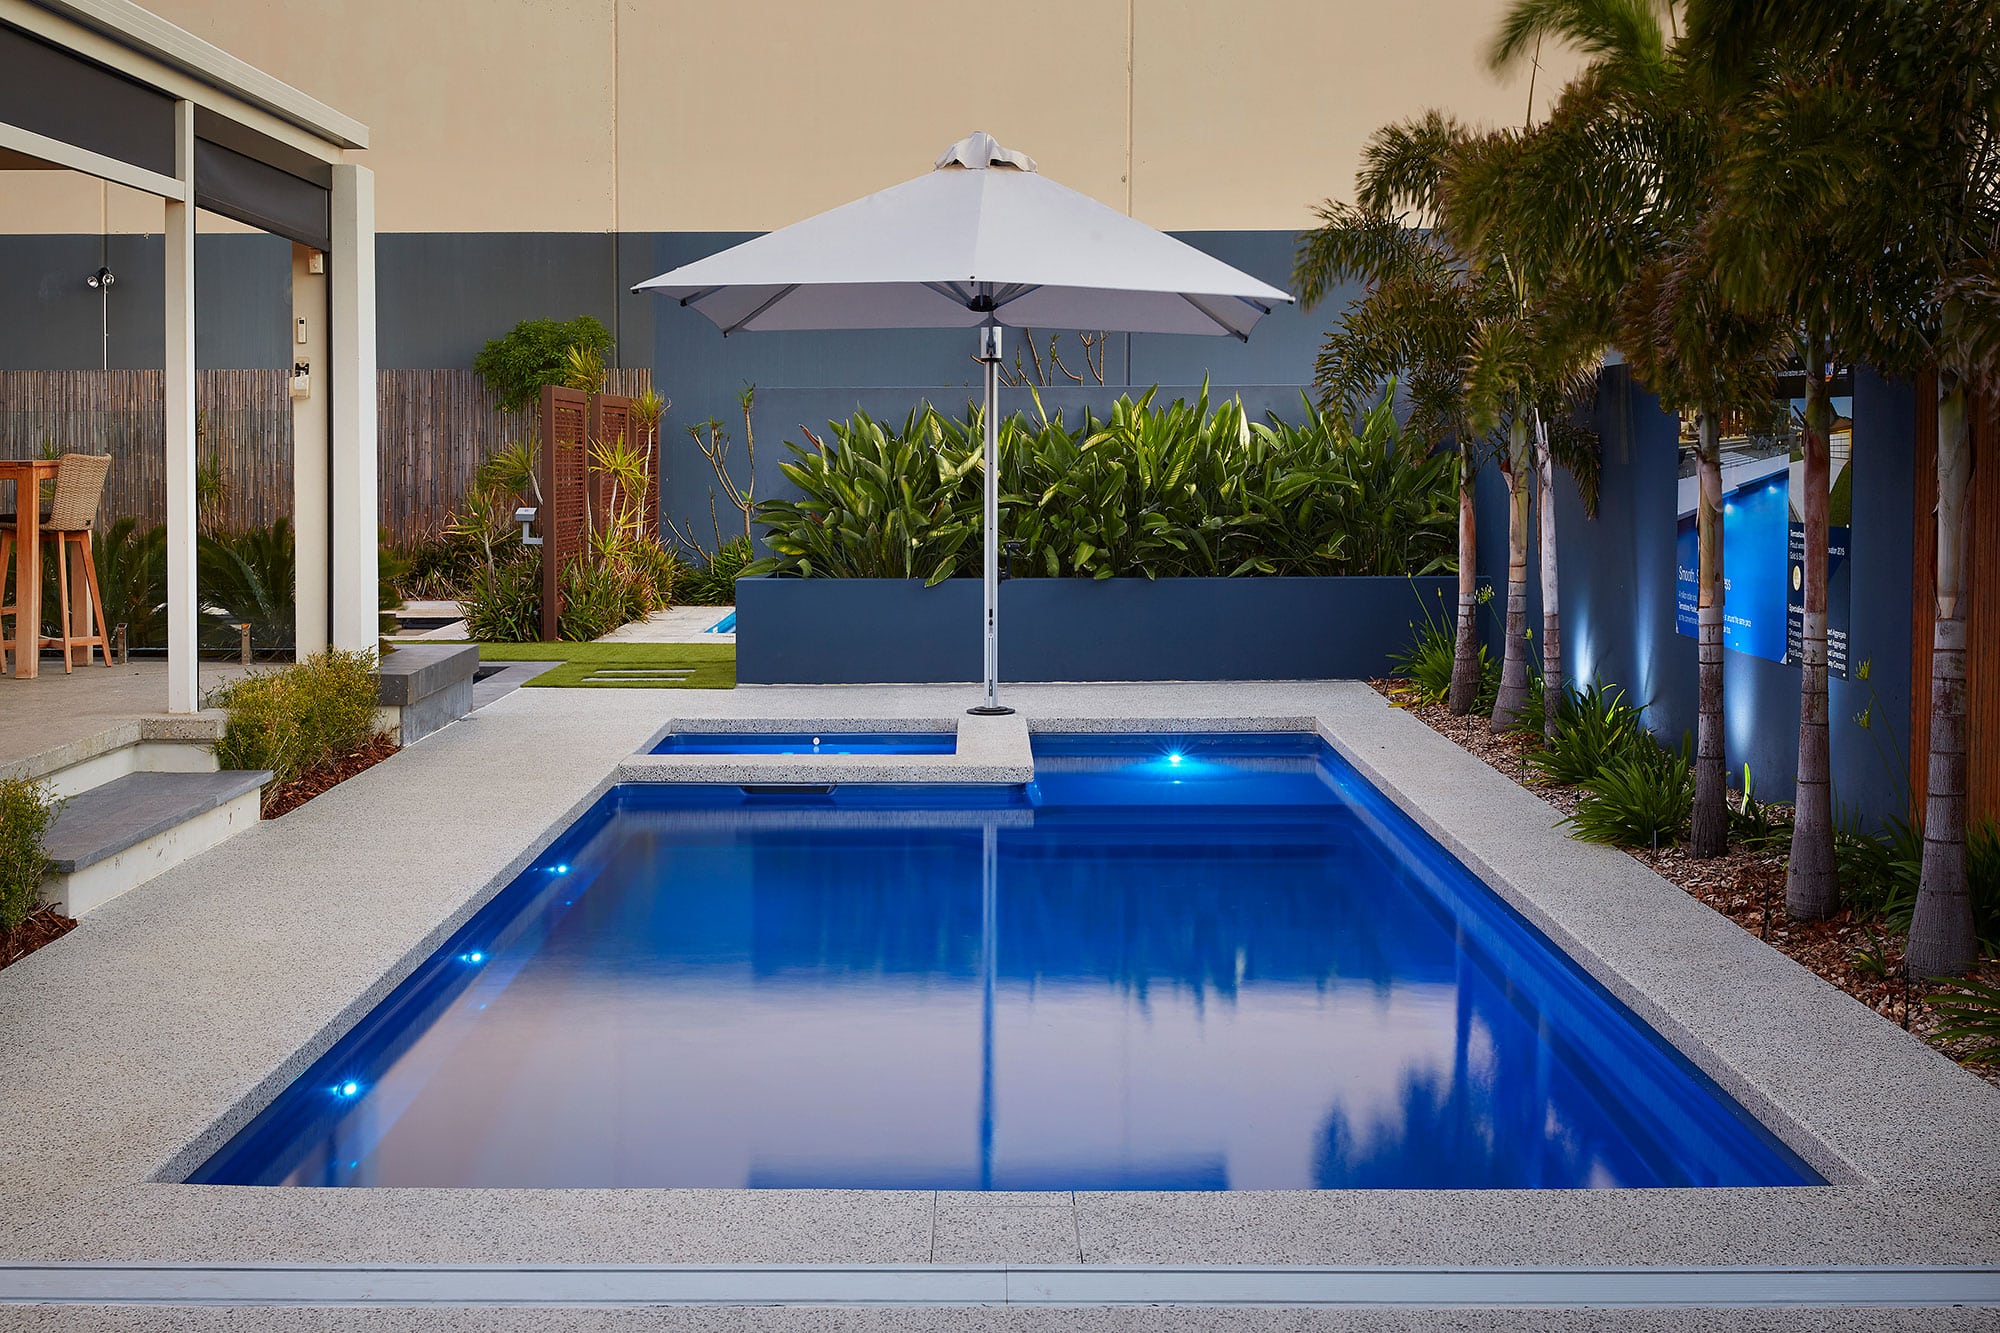 a pool with decorative concrete edging in a garden of palms and an umbrella